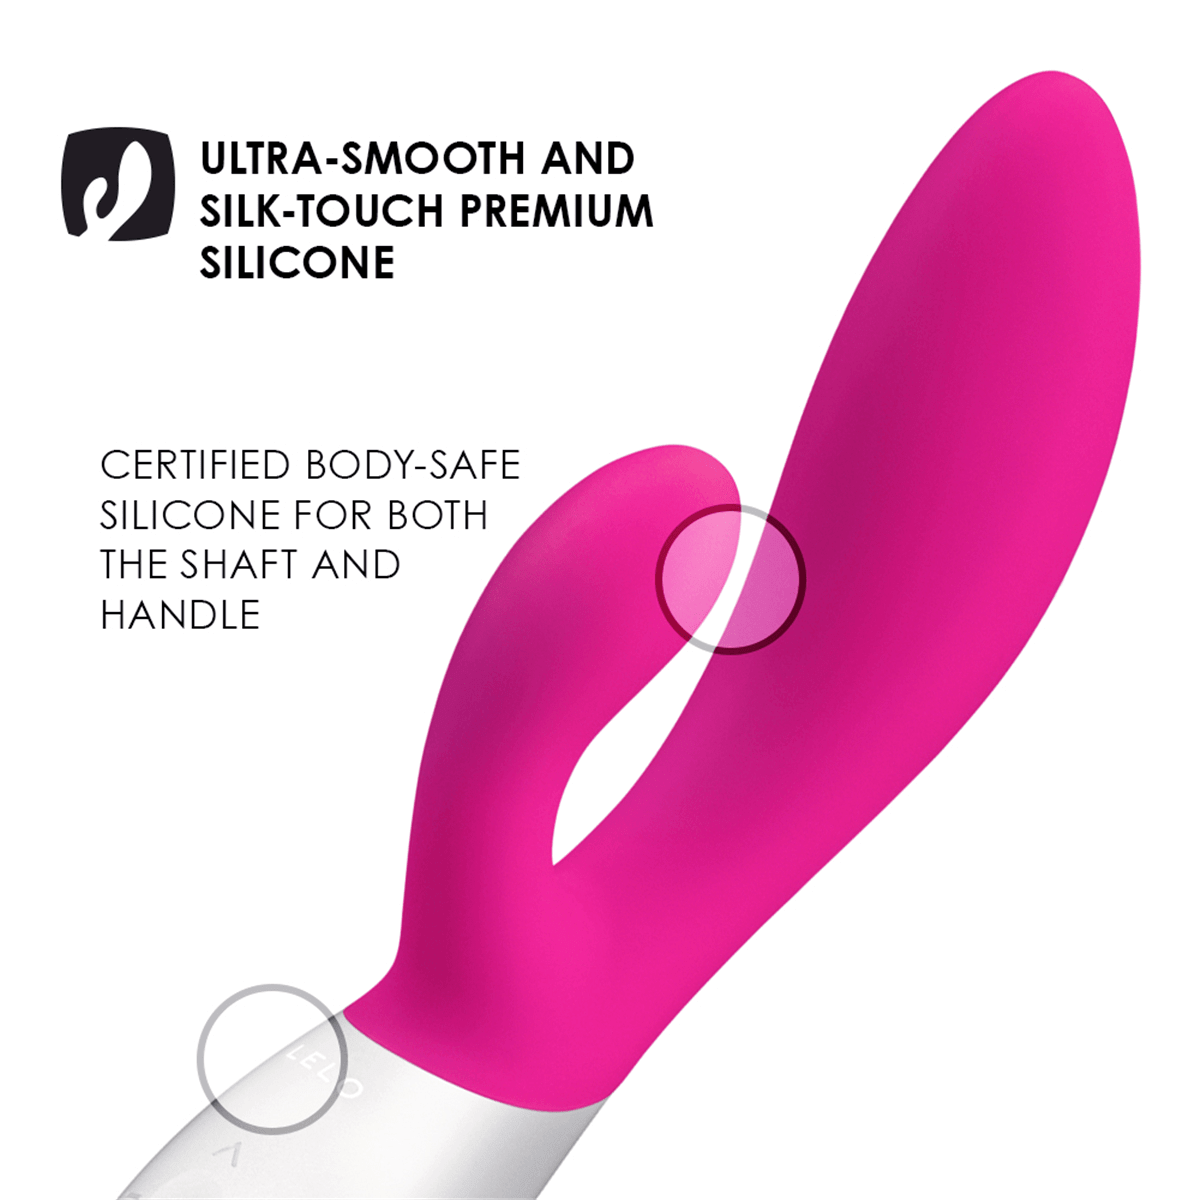 Lelo INA Wave G-Spot and Clitoral Vibrator - Thorn & Feather